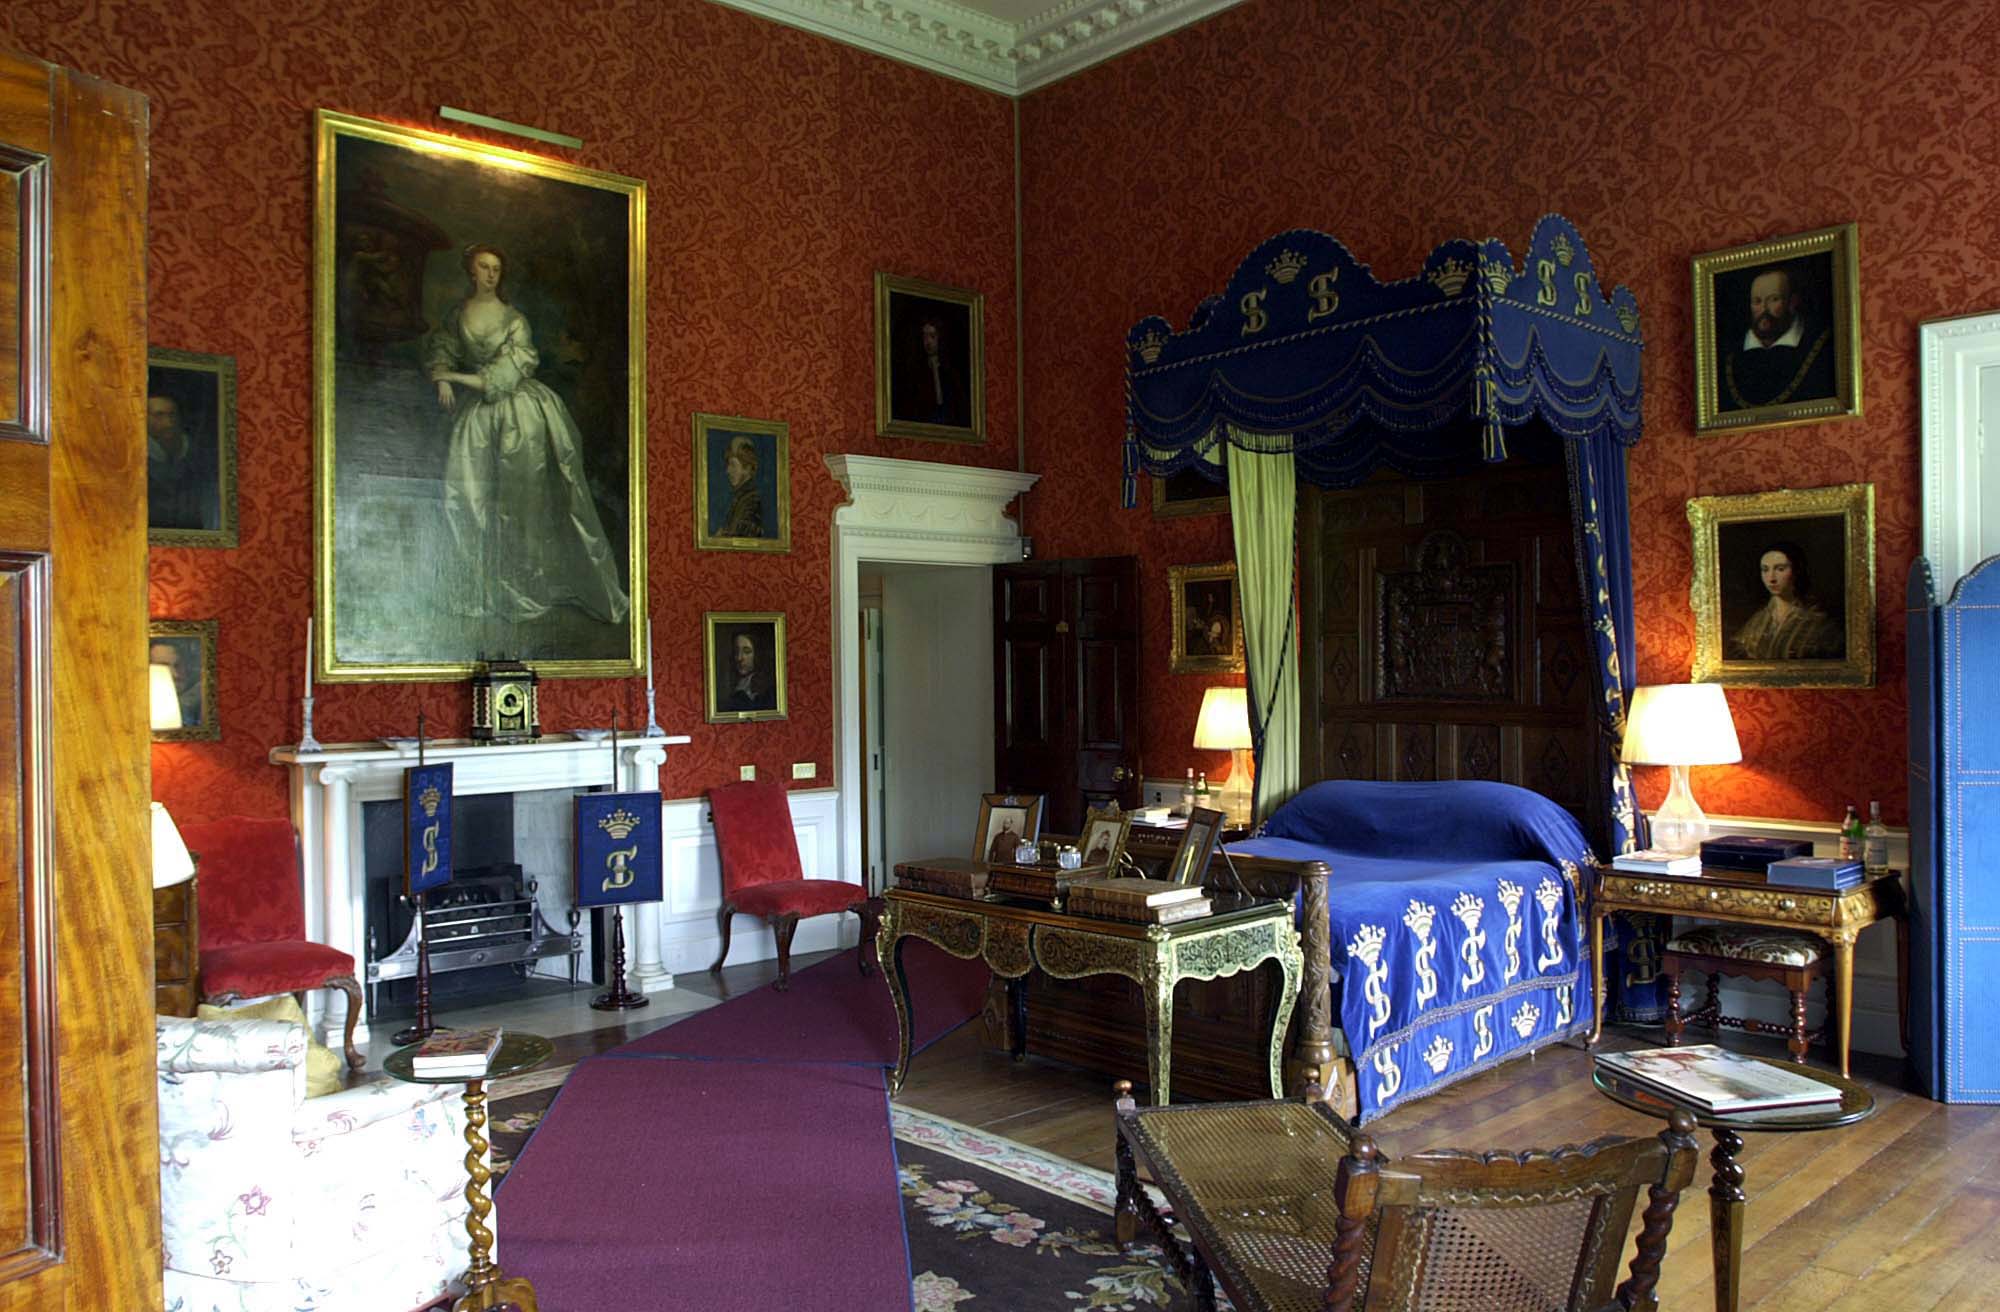 Pictured: A state bedroom at Althorp House which showcases portraits by the likes of Van Dyke. / Source: Getty Images